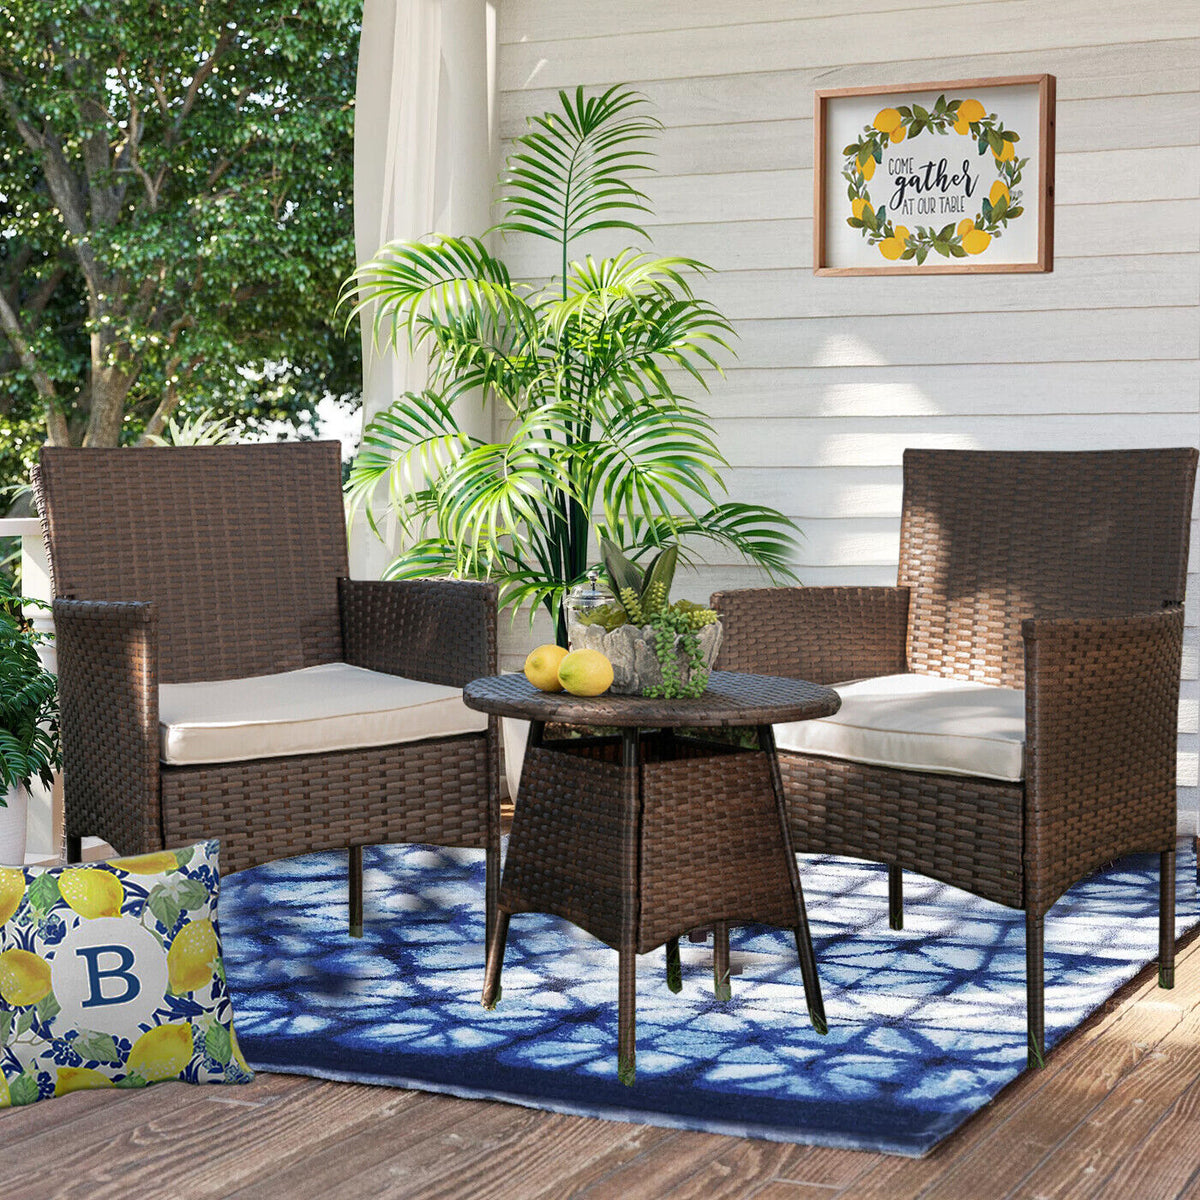 3-Piece Cushioned Wicker Chairs Set with Table Outdoor Patio Furniture